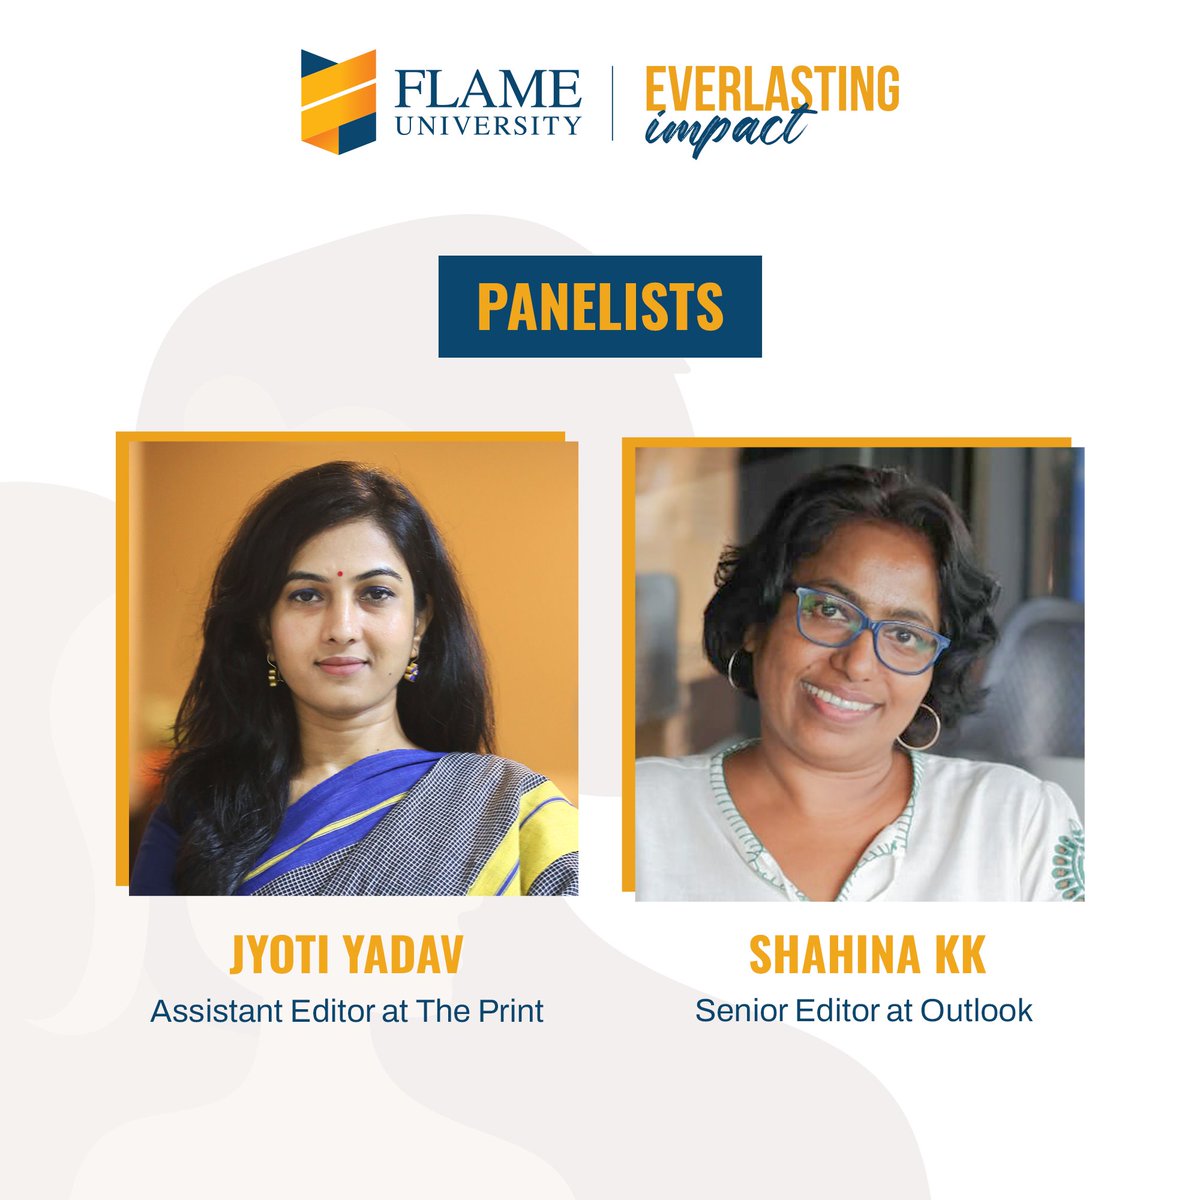 Join FLAME University Women's Cell for a thought-provoking panel discussion on women’s issues with award-winning journalists Shahina KK and Jyoti Yadav. Delve into important topics such as gender, violence, and justice, and hear from these renowned voices in journalism. Don’t…